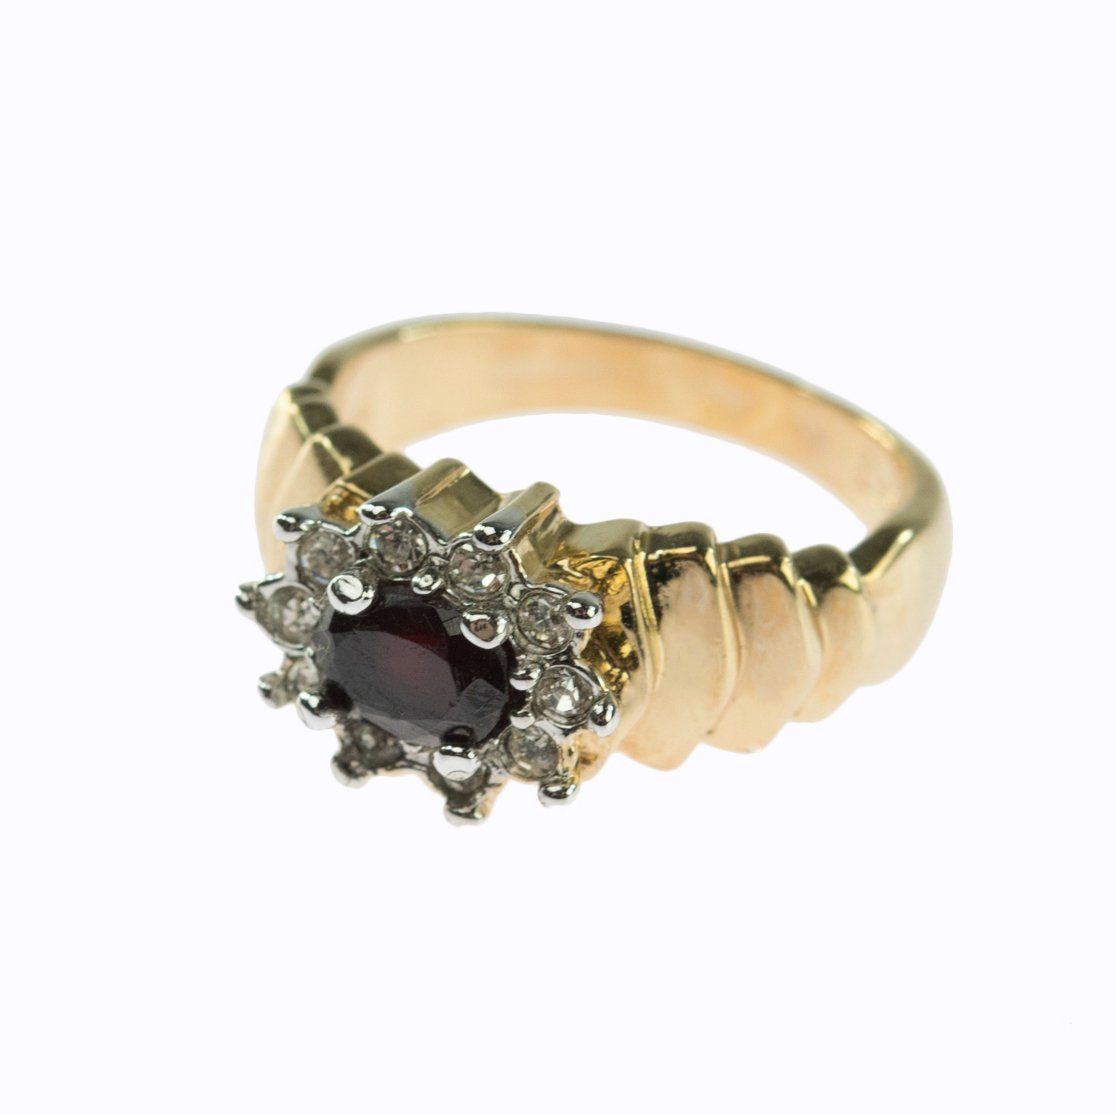 Vintage Ring Genuine Garnet and Clear Swarovski Crystals 18kt Gold Plated Band January Birthstone R2950 Size: 10